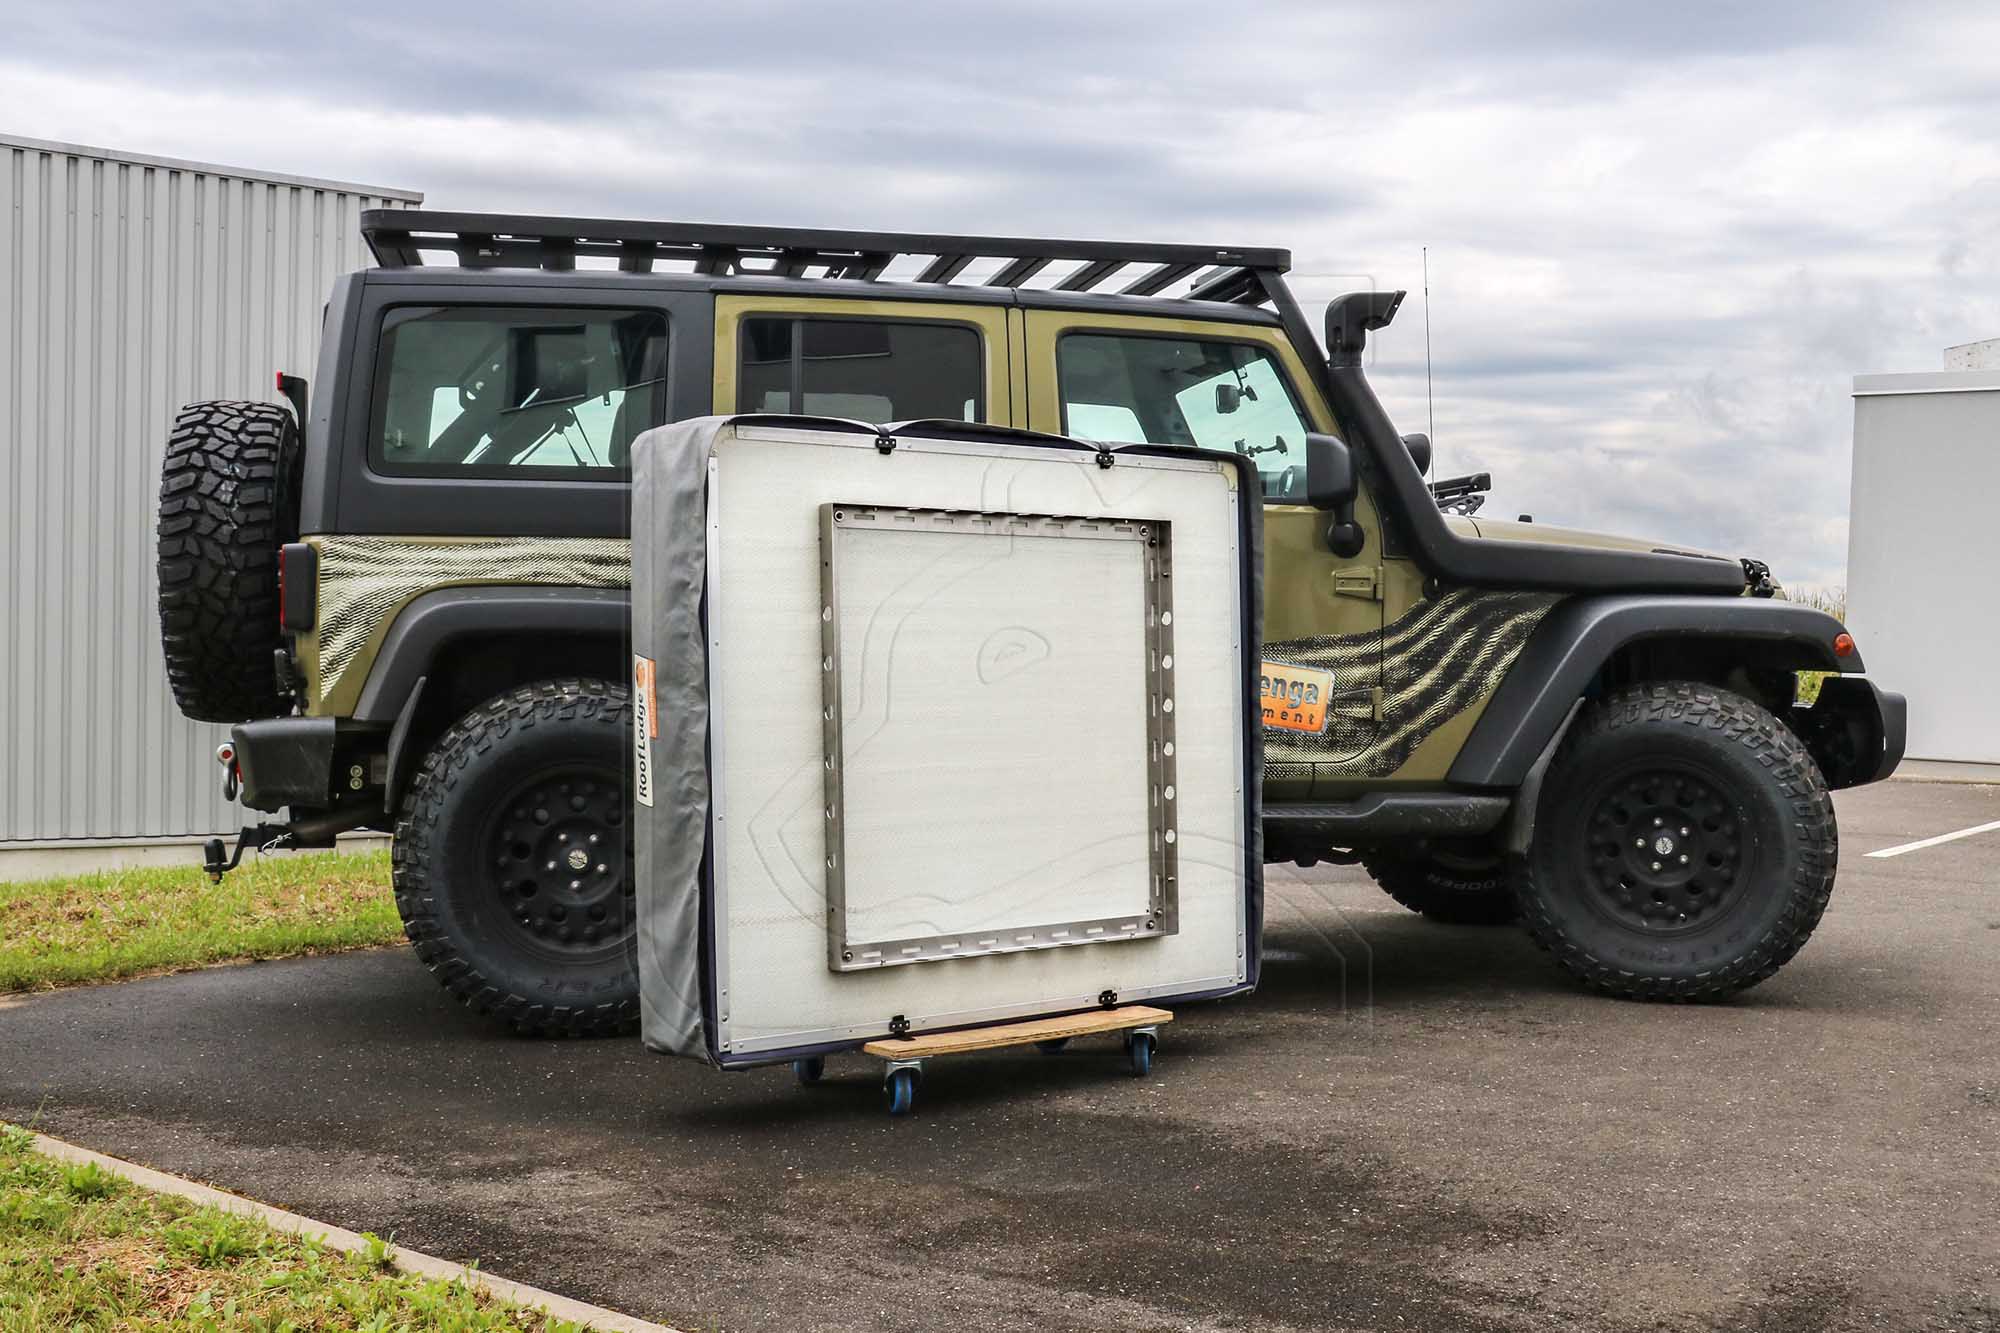 ▷ CargoBear Quick Release Frame for Roof Top Tents - shop now!